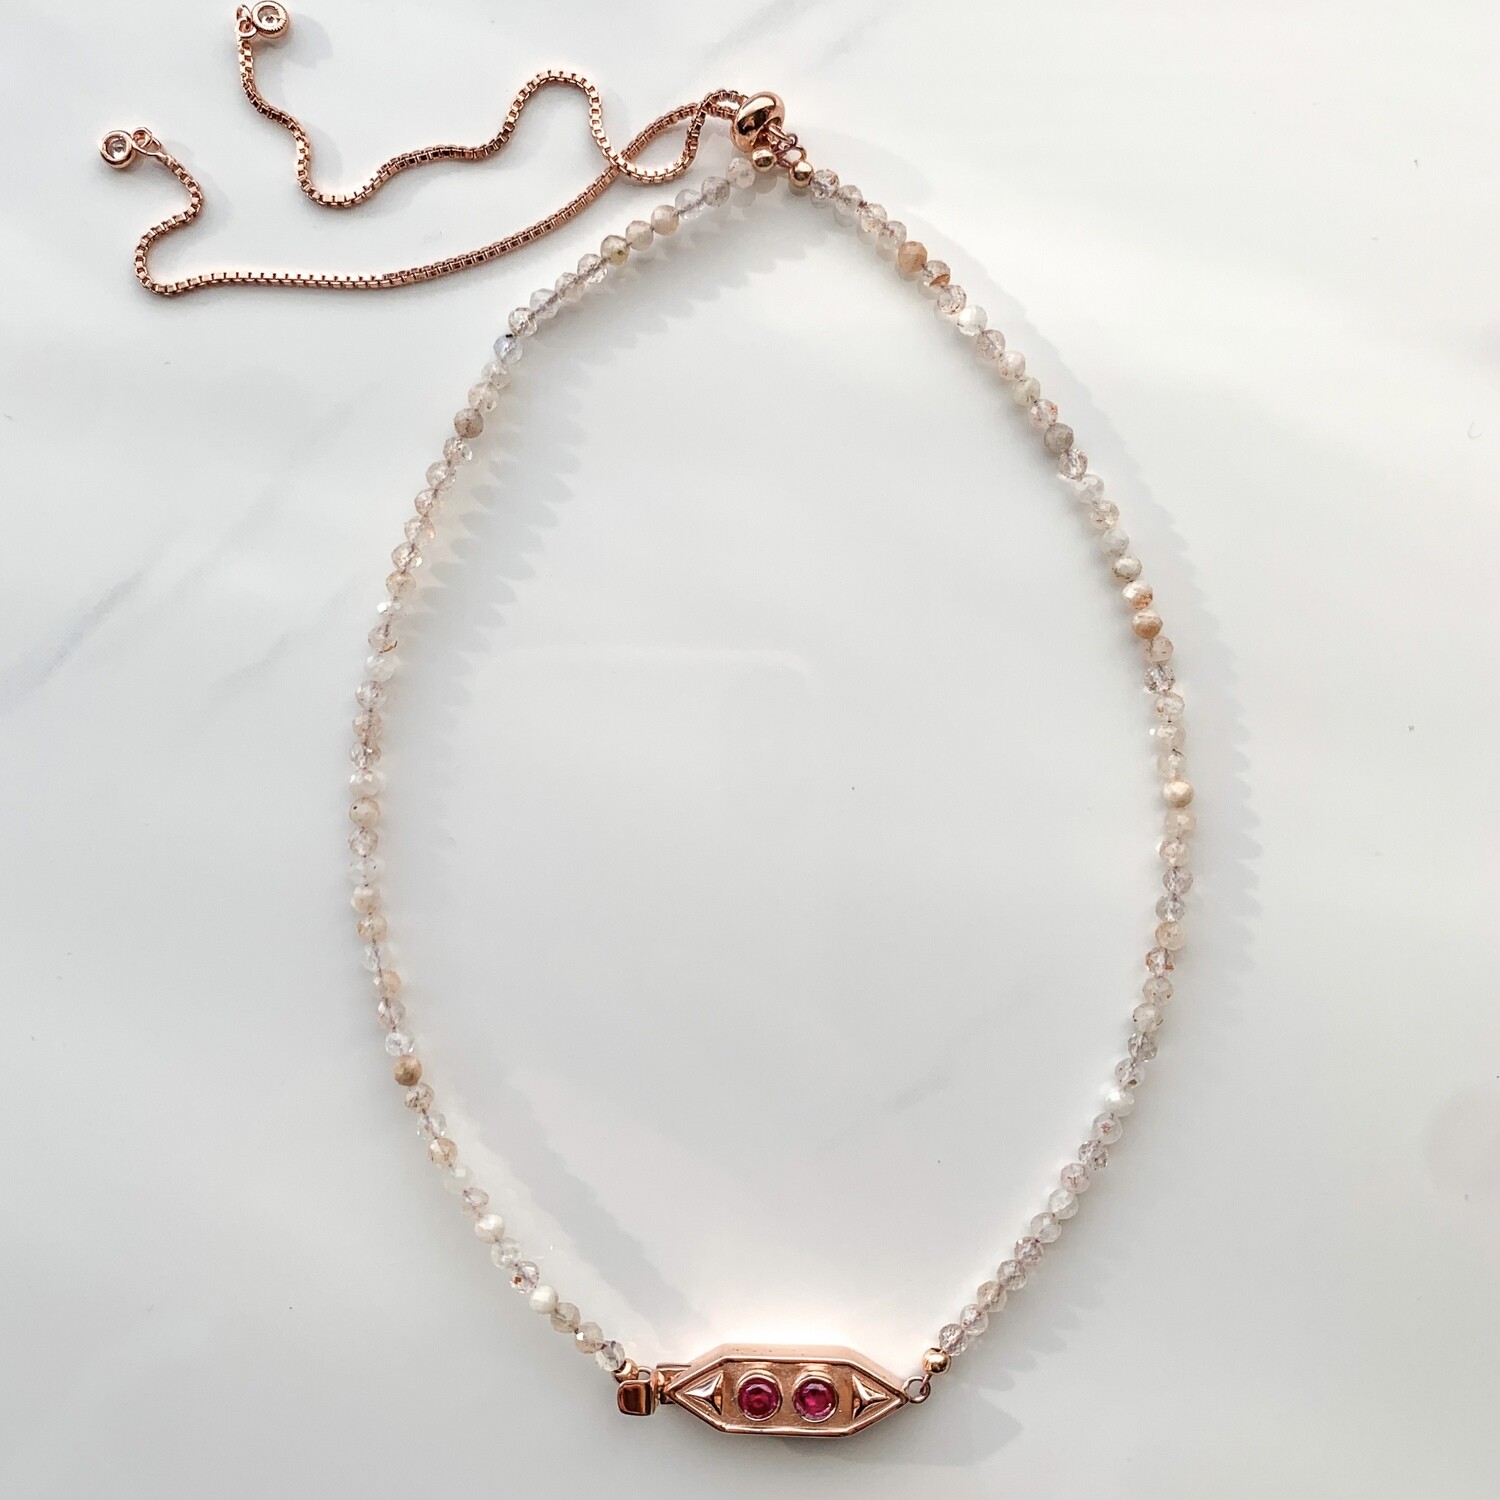 Agate Necklace with Burmese Rubies